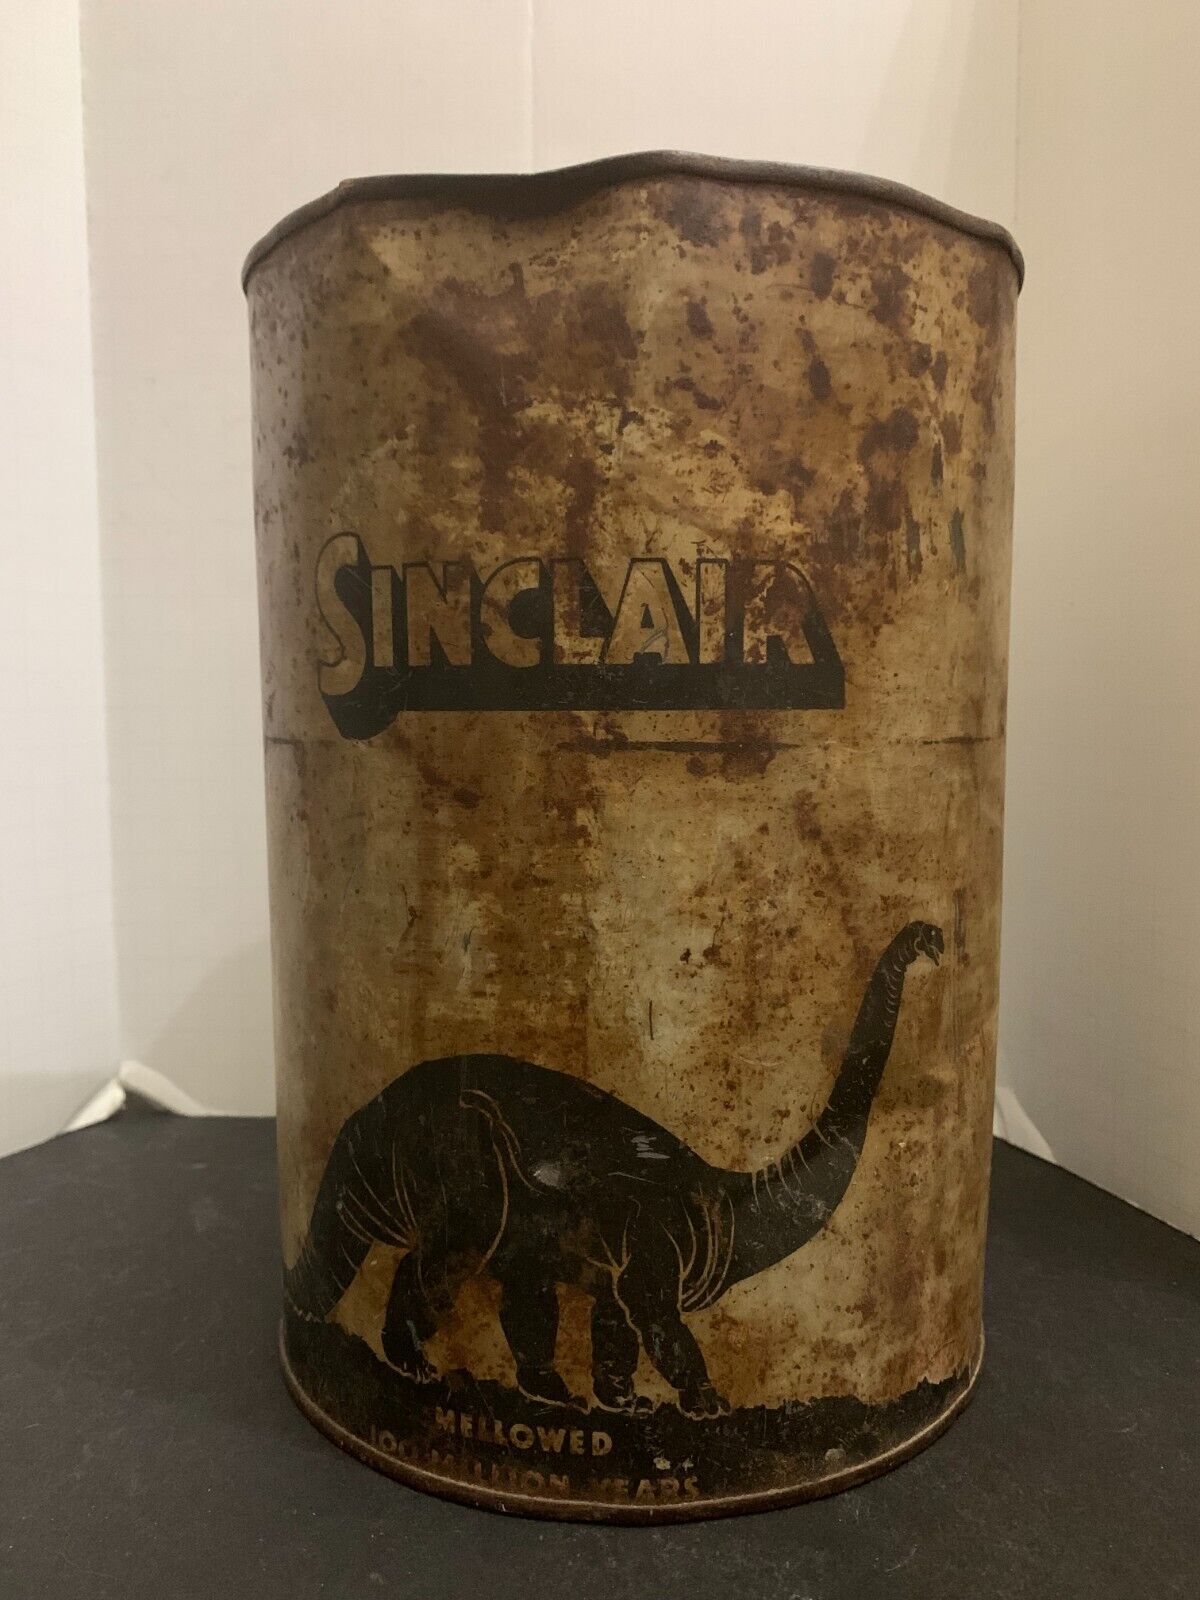 Vintage Sinclair Oil 5 Quart Substitution Proof Can Mellowed 100 Million Years